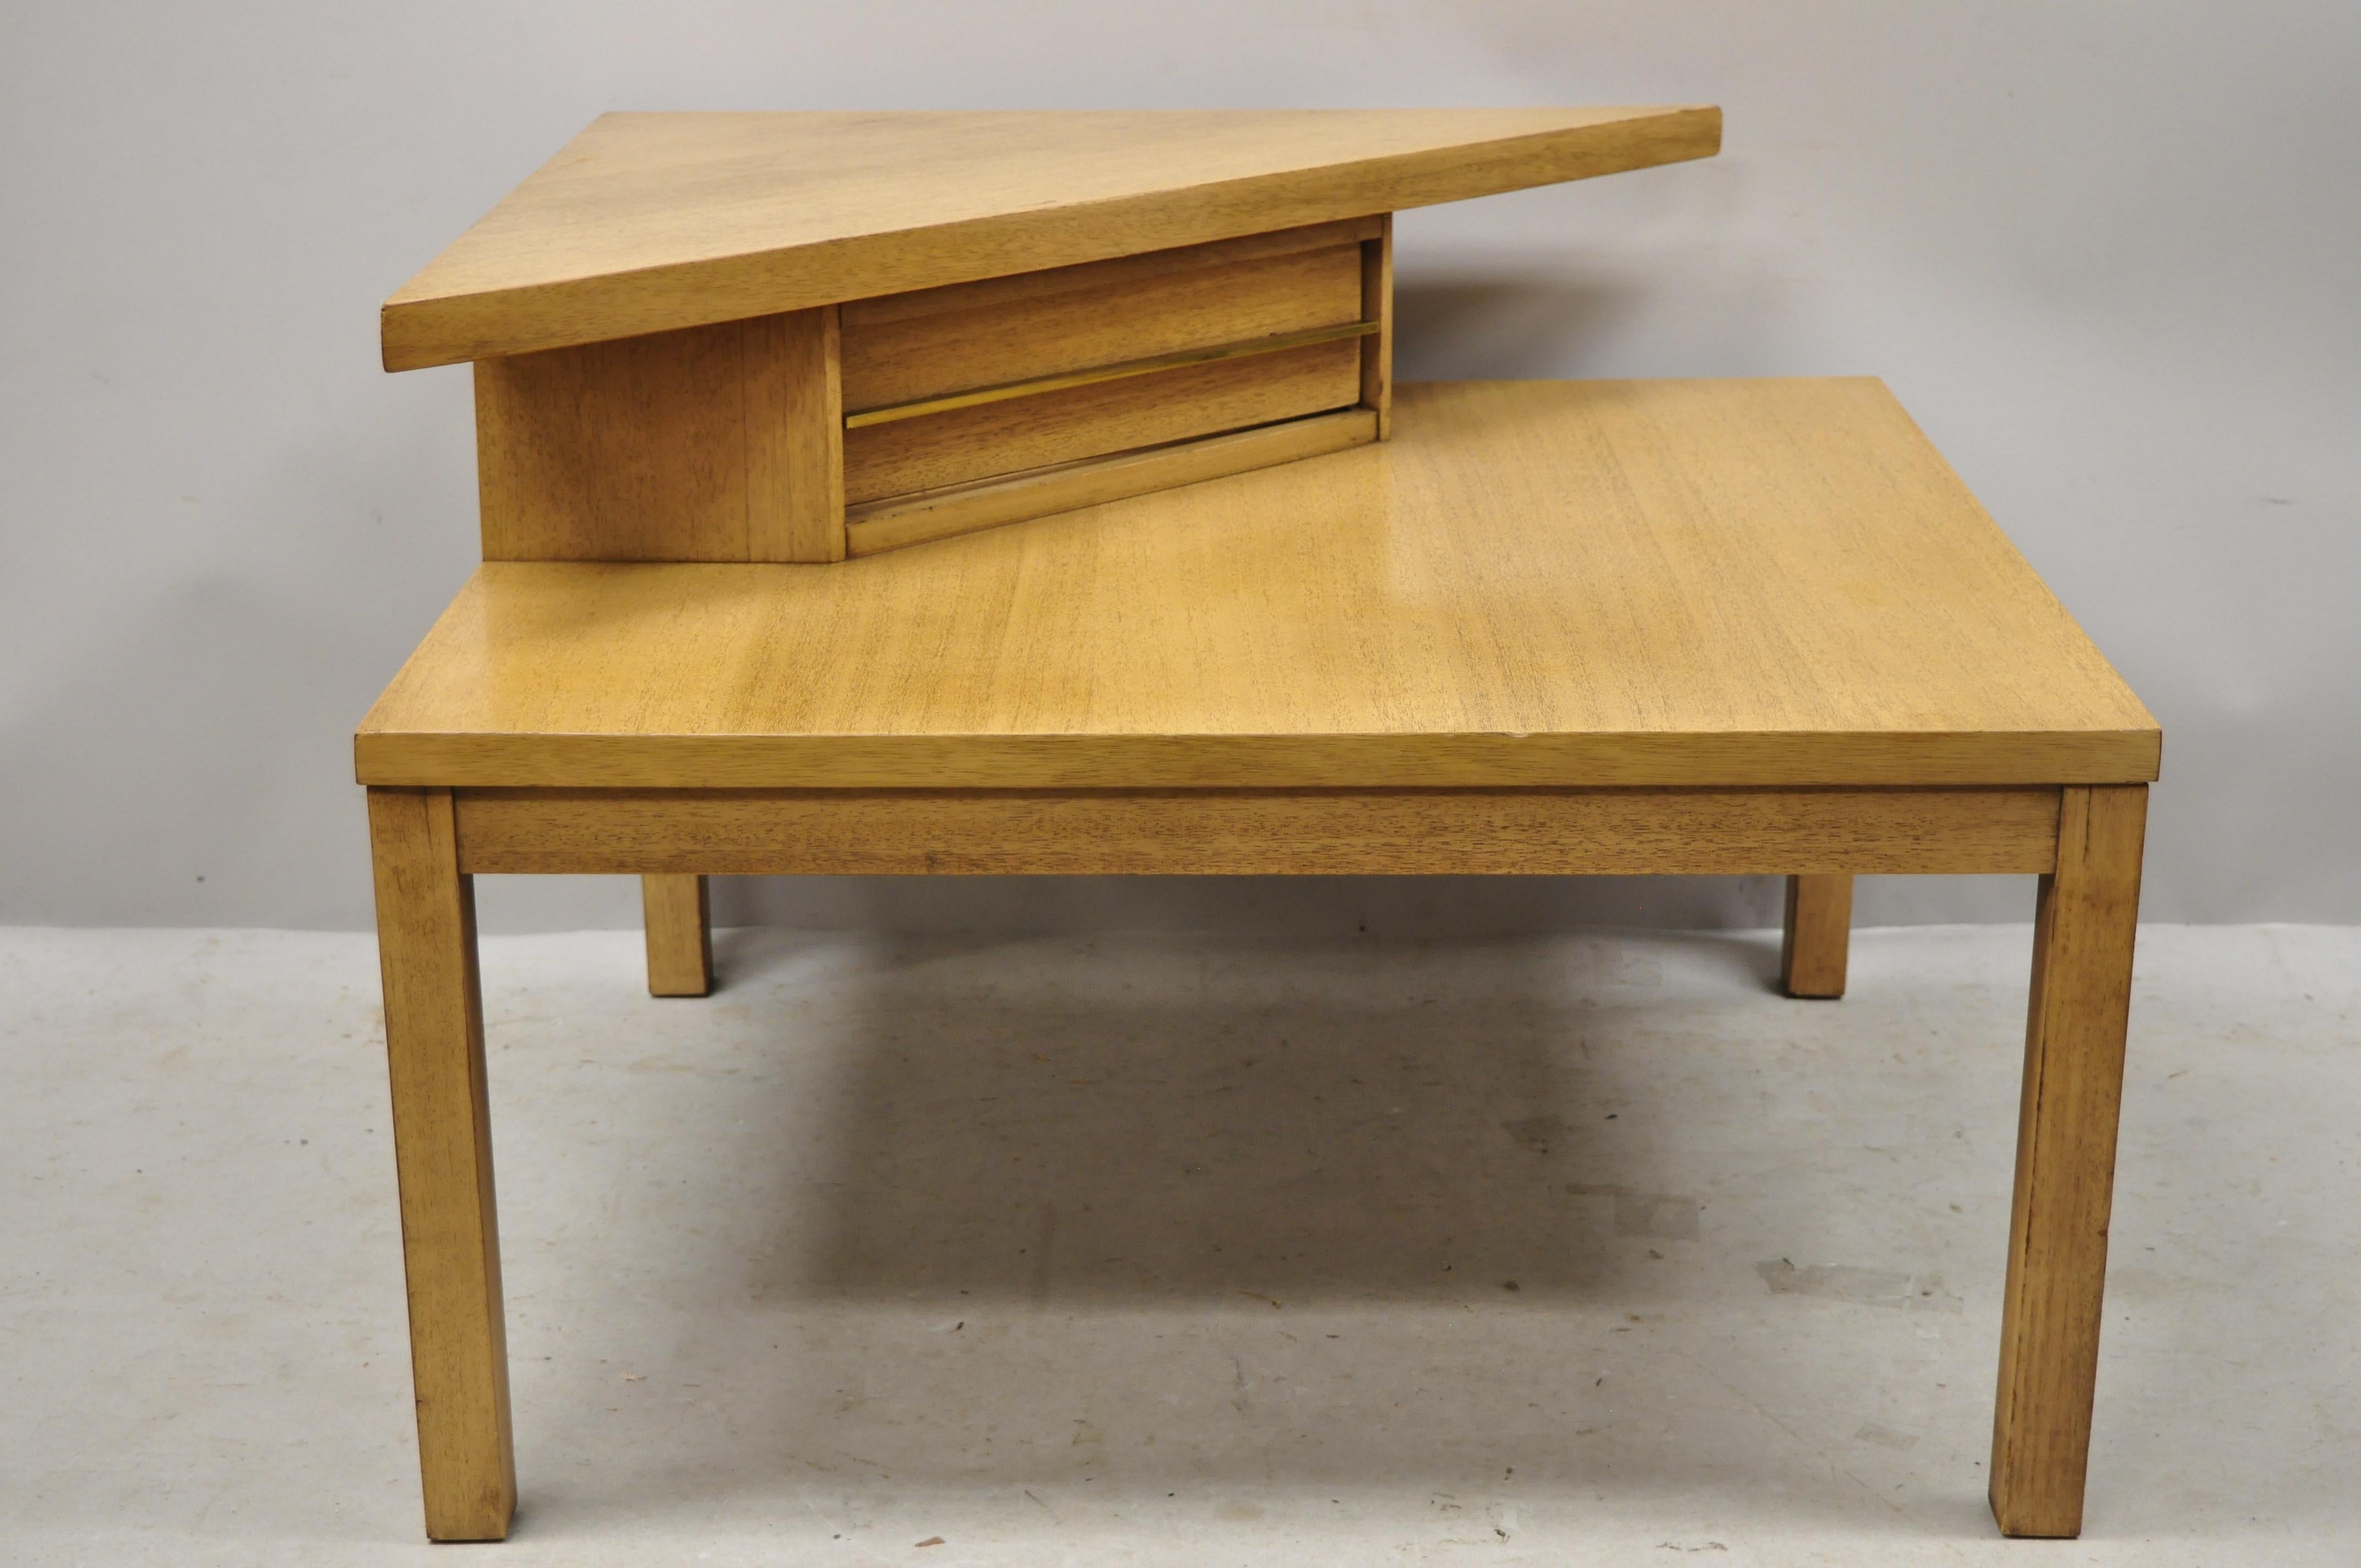 Mid-Century Modern American of Martinsville mahogany corner coffee side table with Brass Handle. Item features solid brass modernist sleek drawer handle, beautiful wood grain, original stamp, 1 dovetailed drawer, very nice vintage item, clean